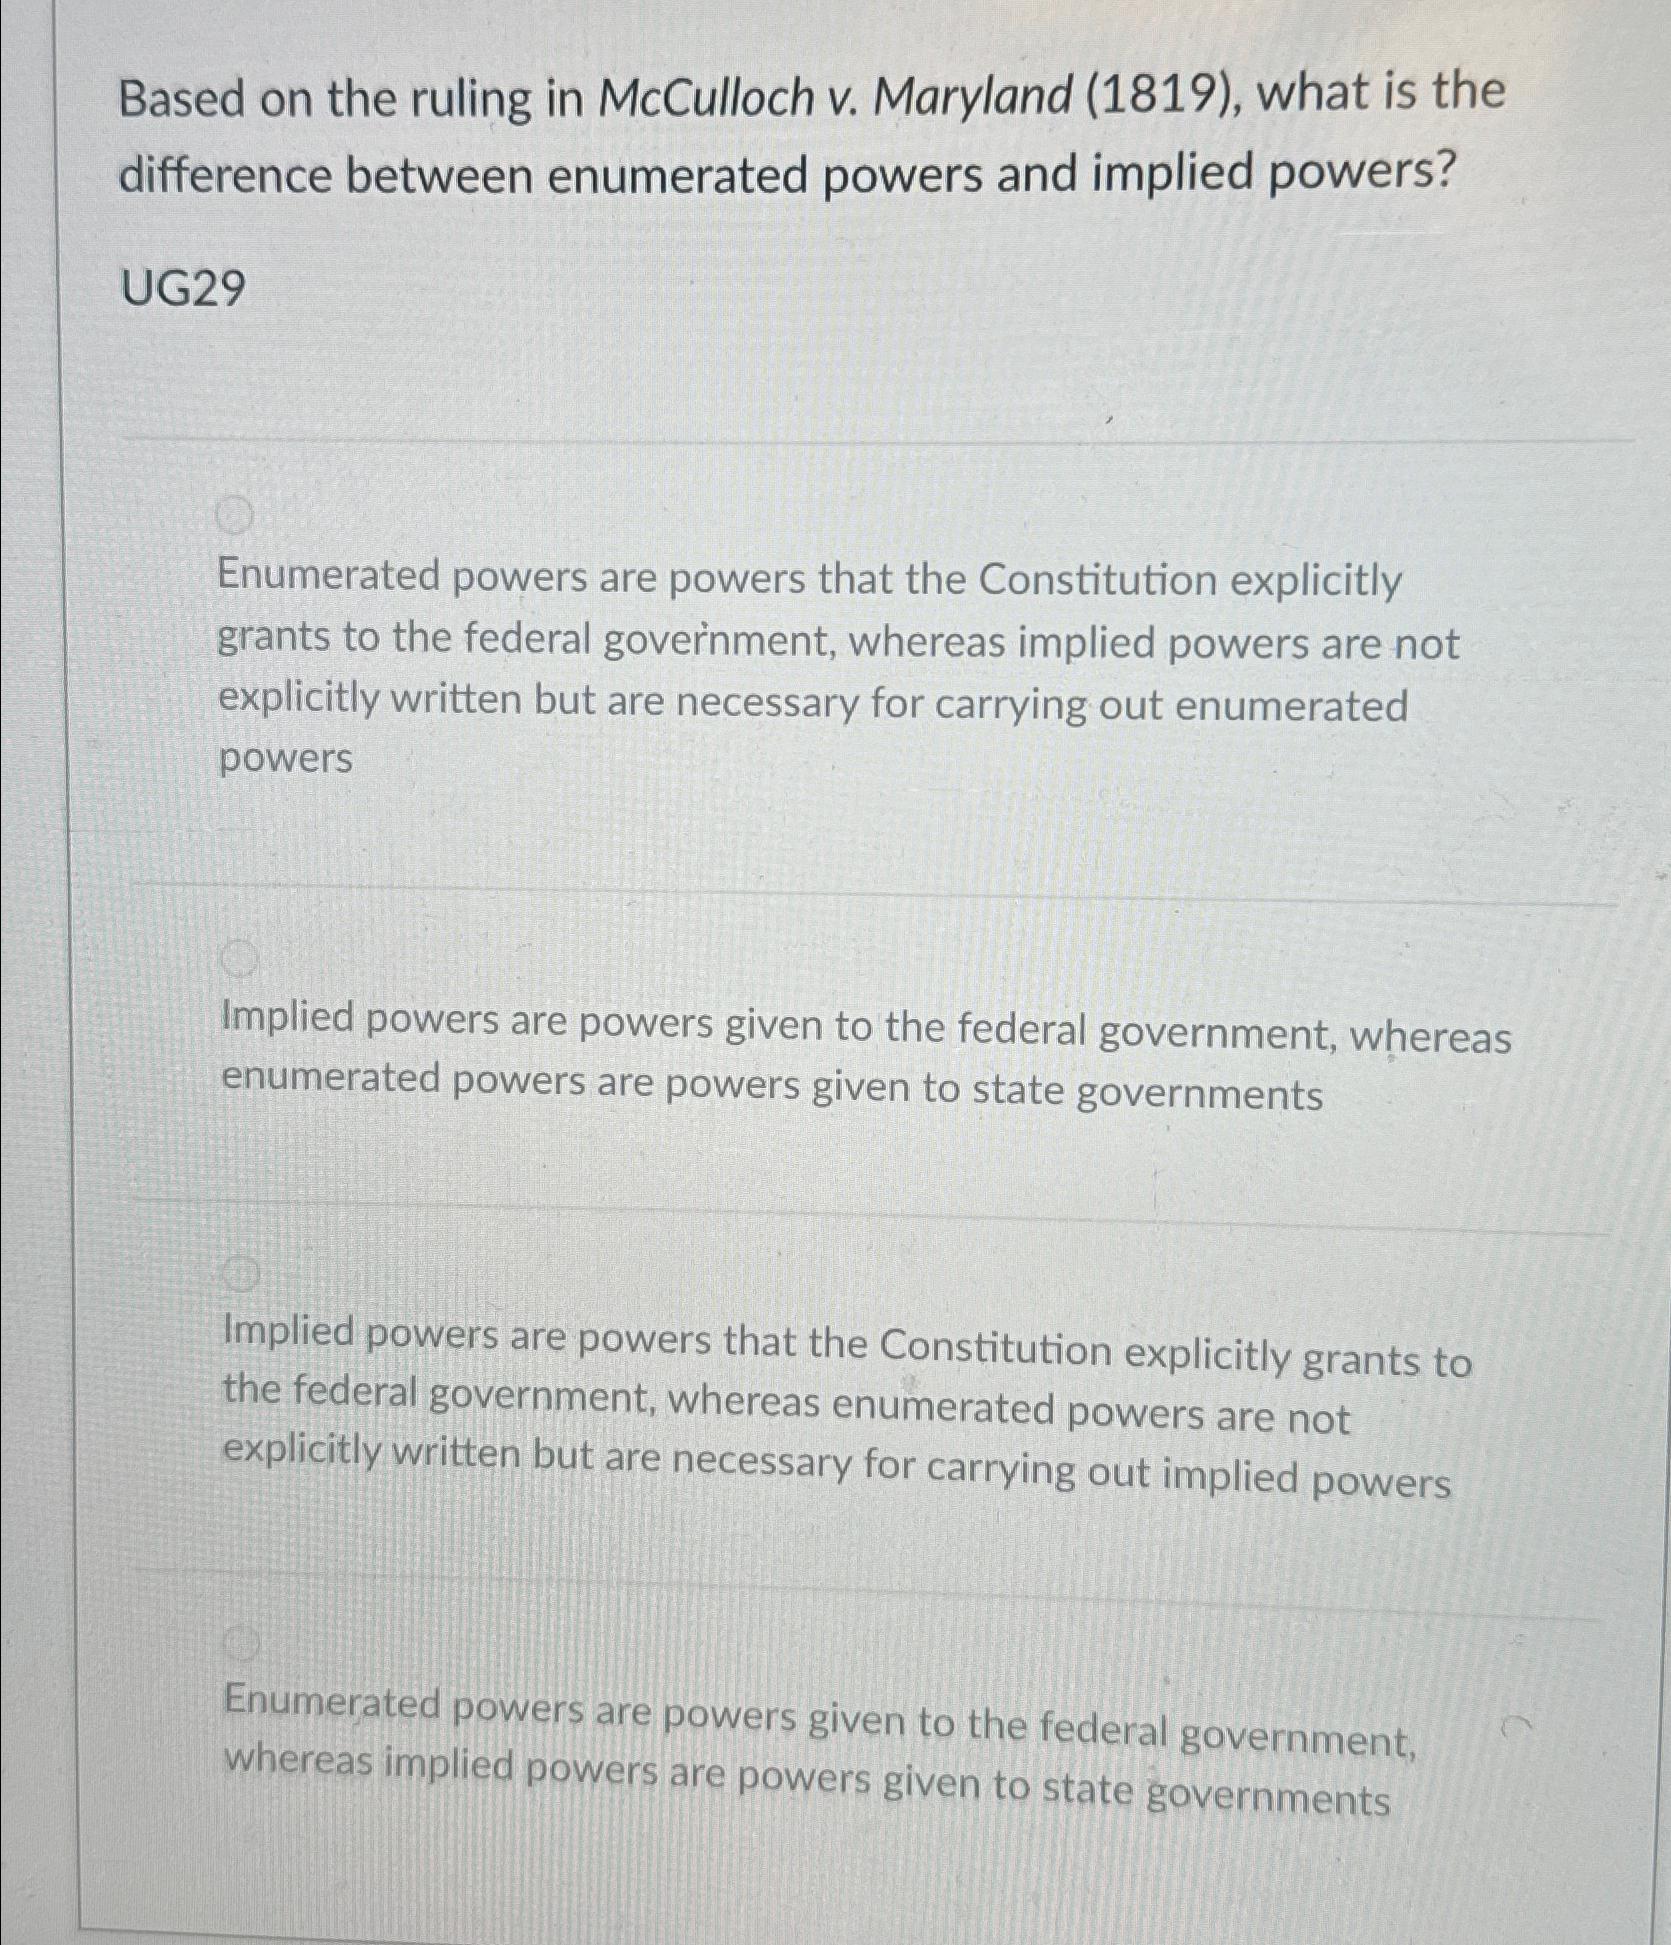 Based on the ruling in McCulloch v. Maryland (1819), what is the difference between enumerated powers and